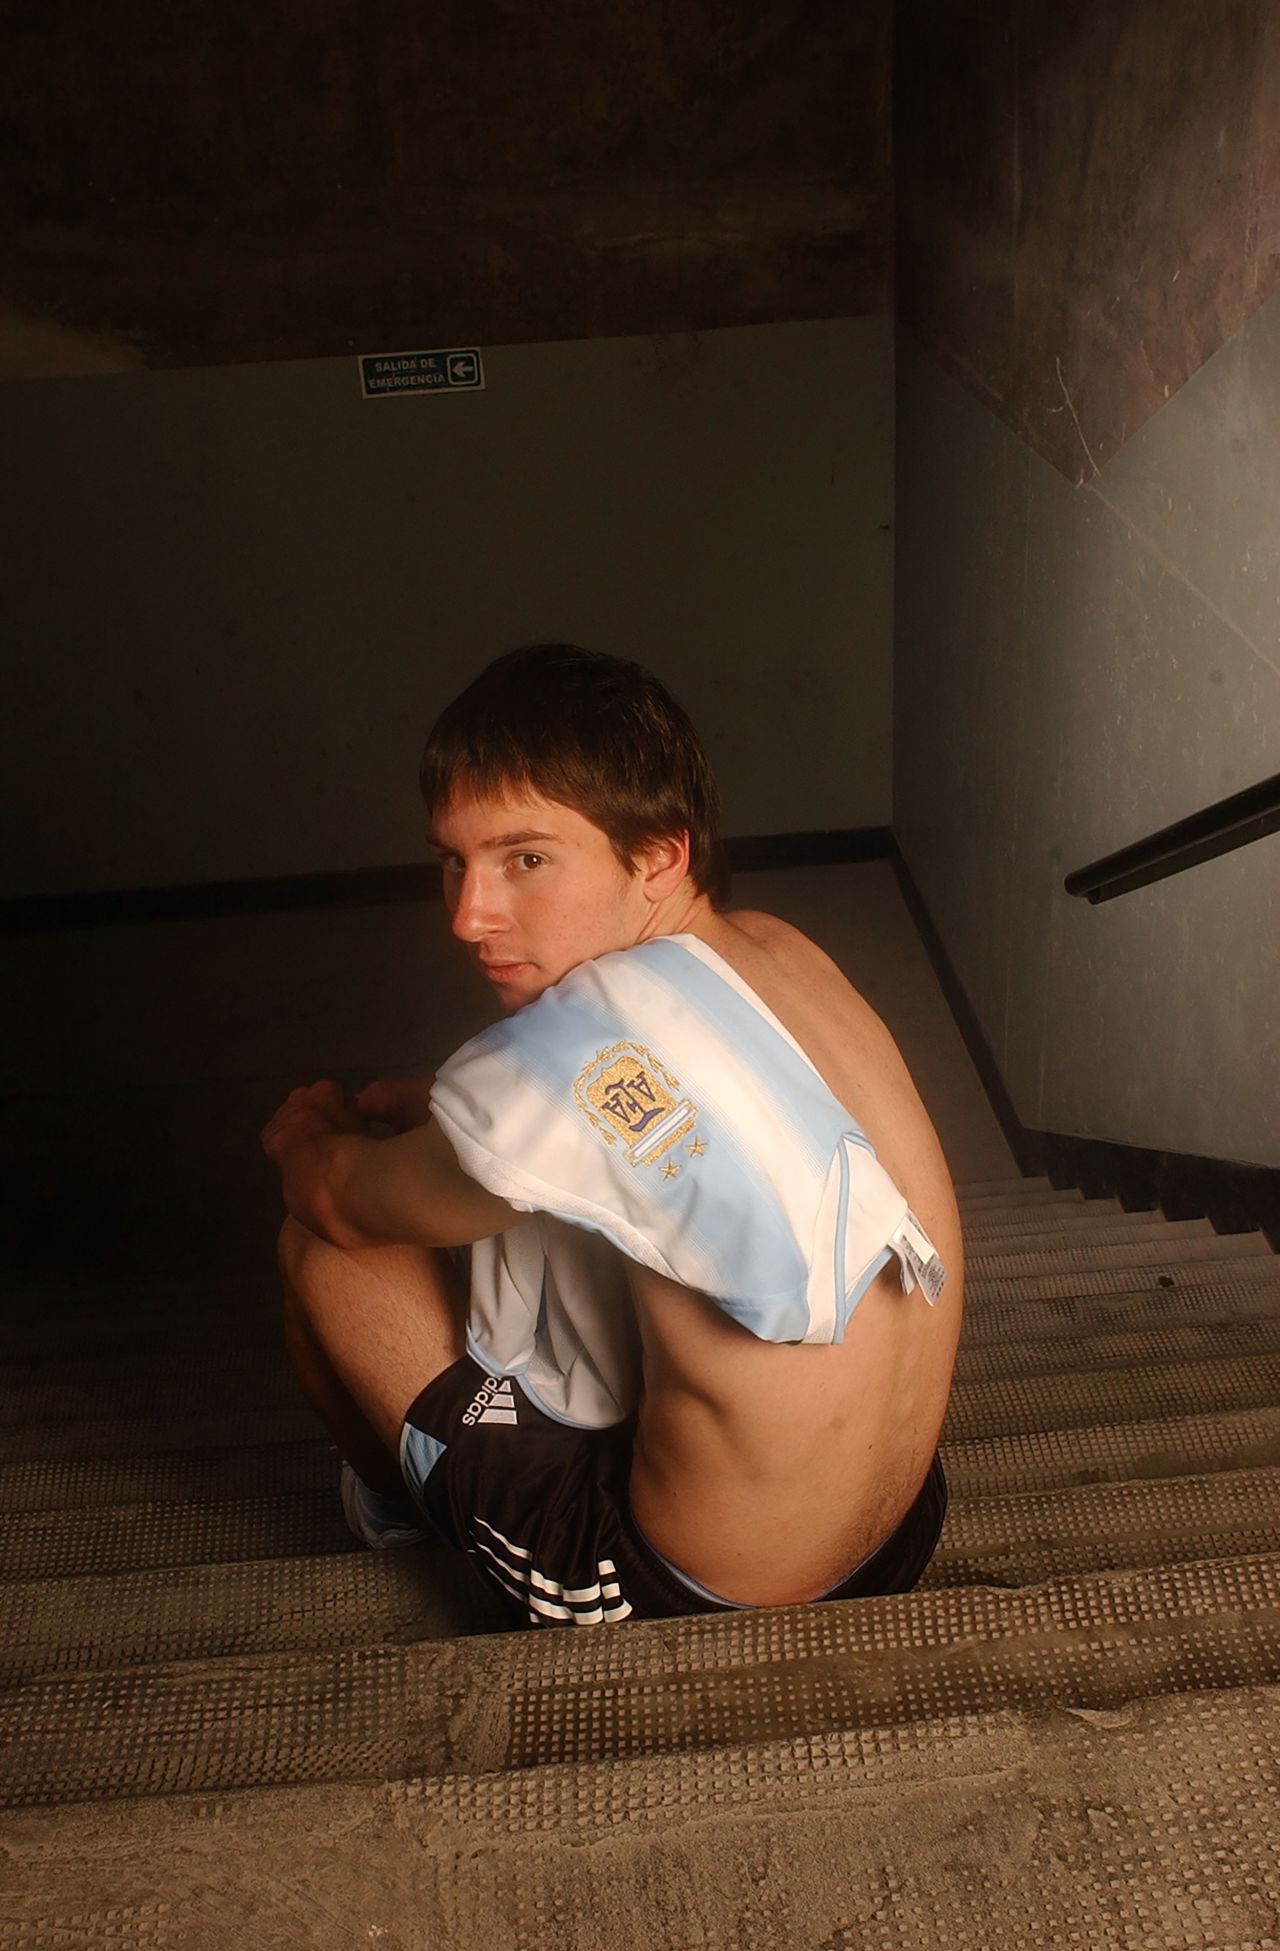 Messi poses with an Argentina shirt for the magazine El Gráfico in June 2005. He would make his senior debut for his country a couple of months later.